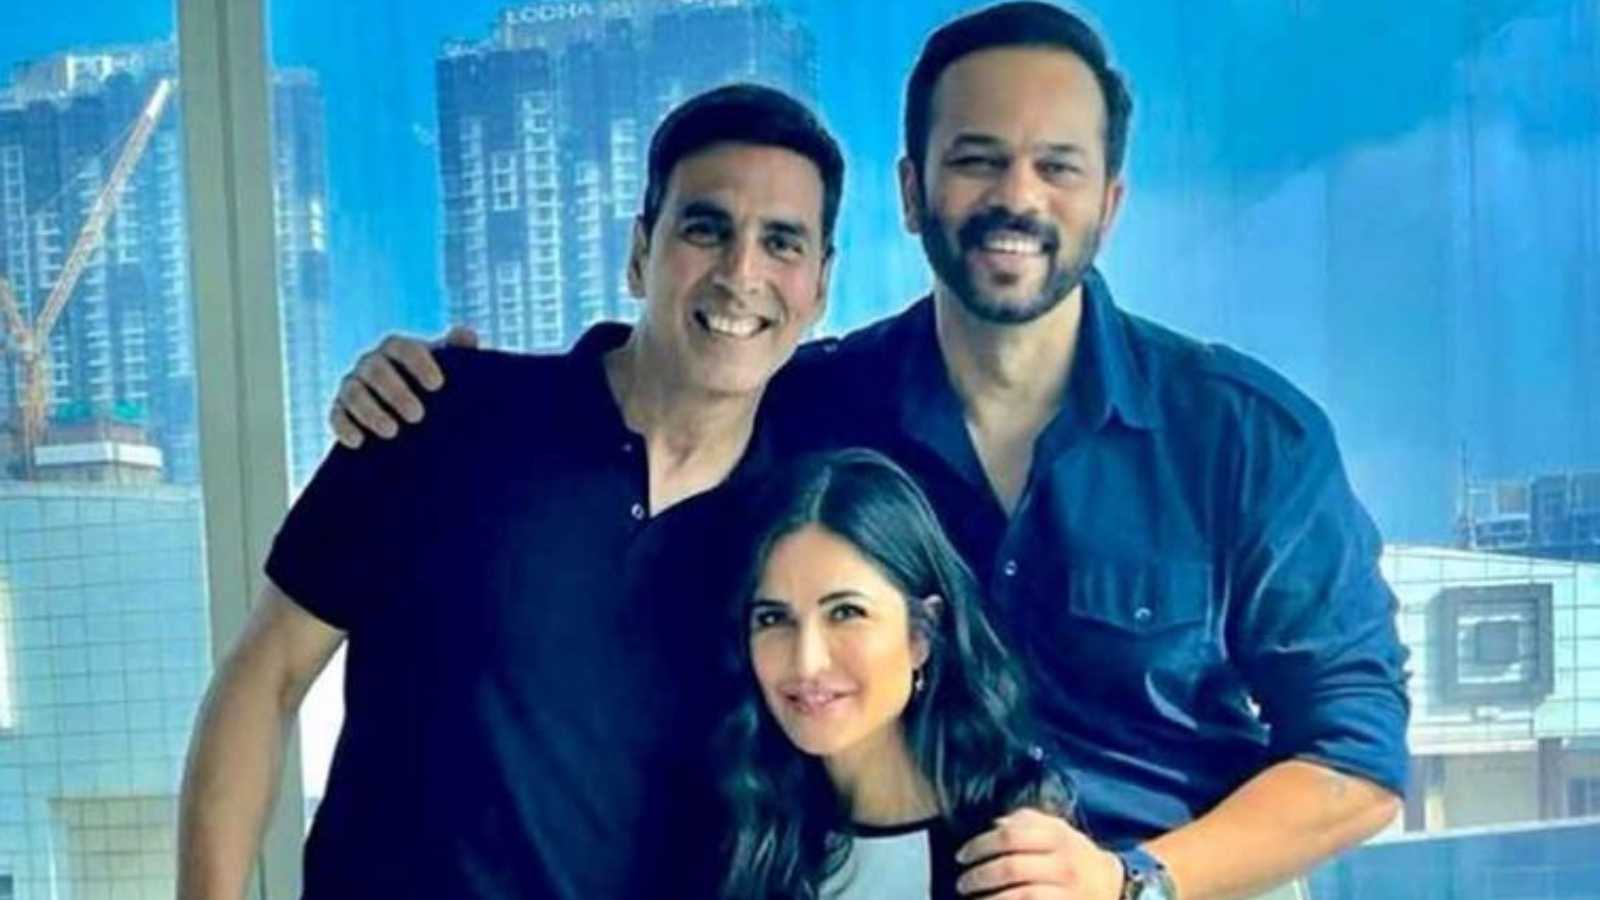 Rohit Shetty says holding off Sooryavanshi for two years was the biggest risk on his life, as Akshay Kumar starrer turns 1